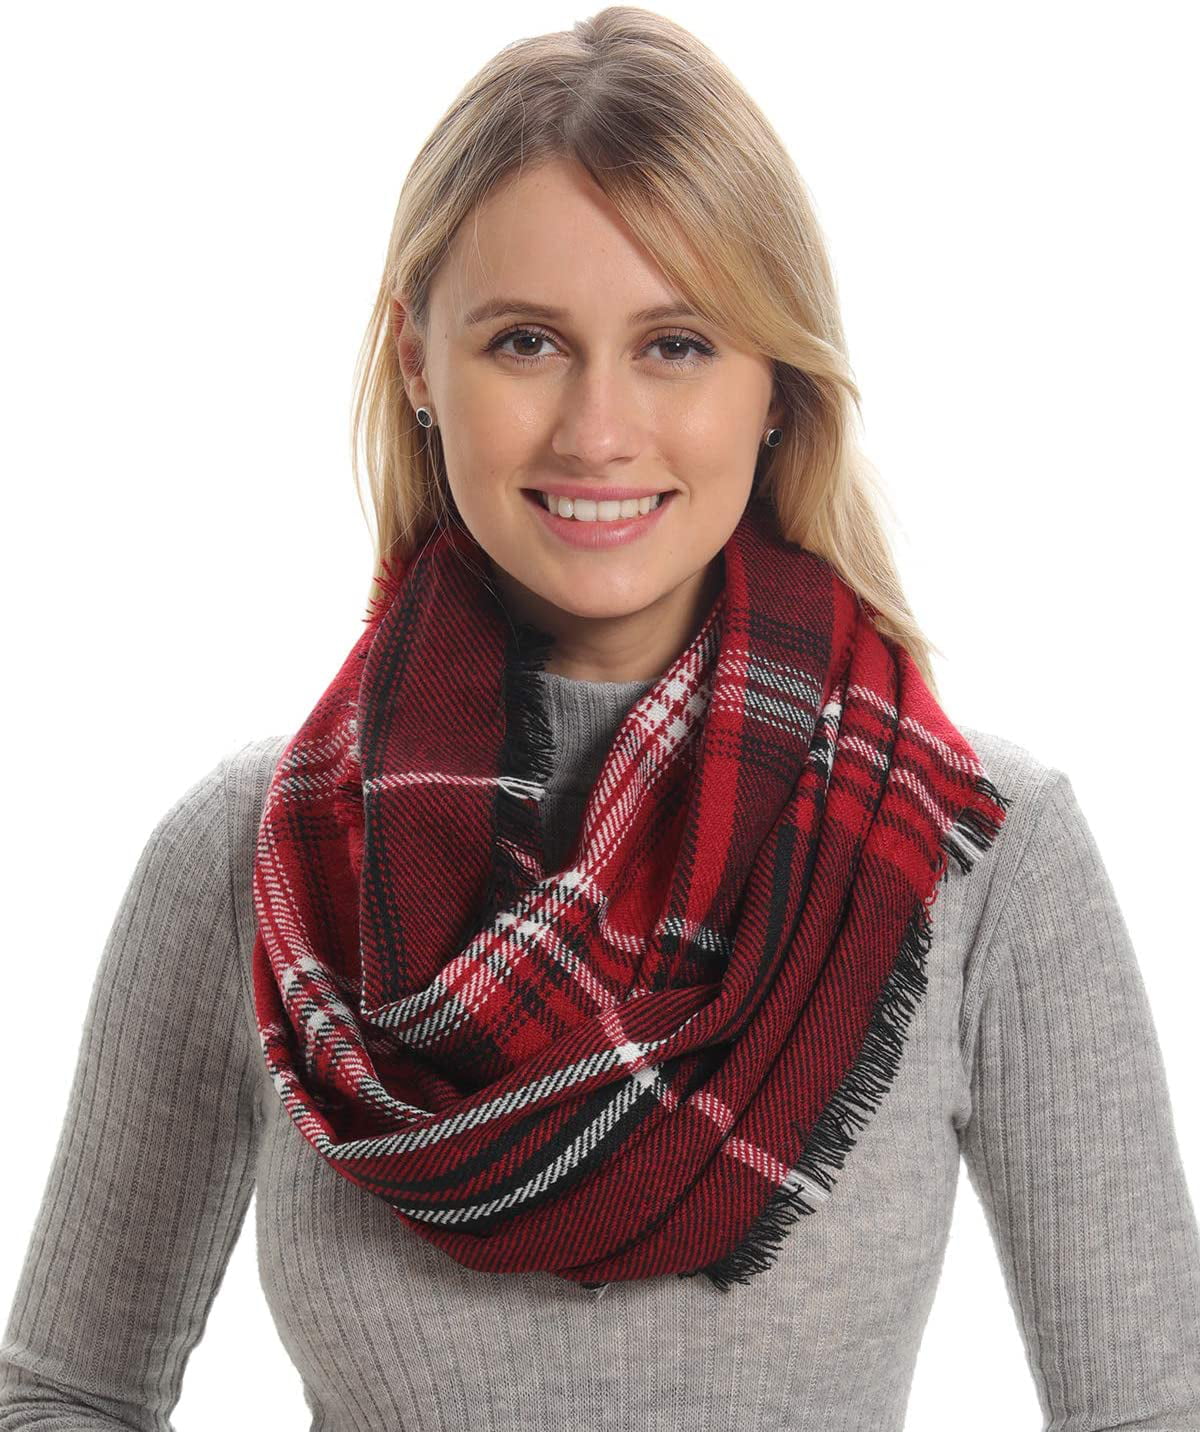 Fuzzy Knit Cashmere Red Buffalo Check Thick Warm Soft Wool Feel Women Plaid Infinity Scarf for Winter Fall